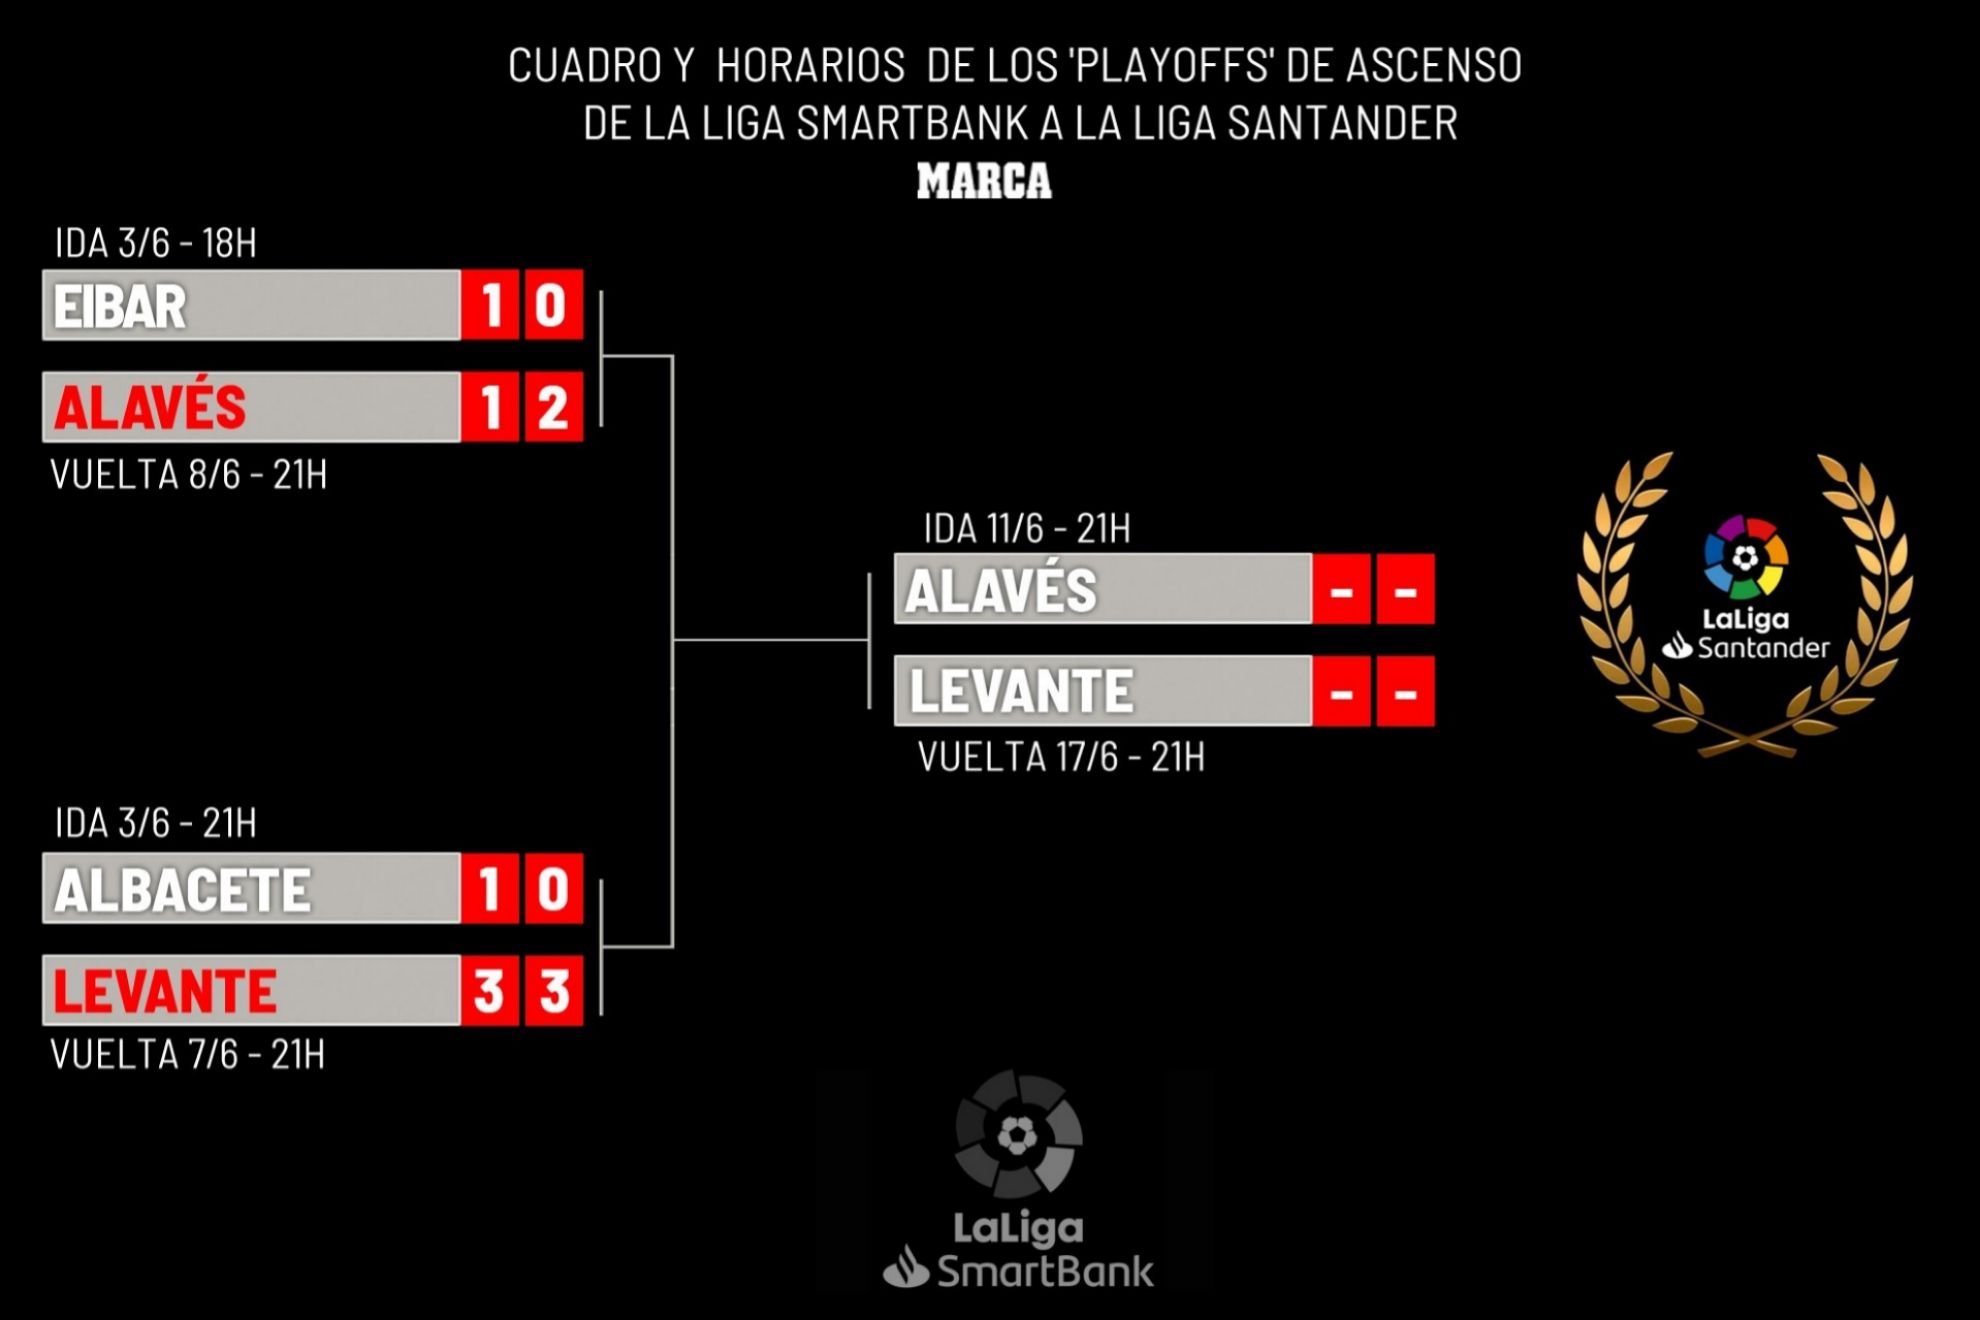 Play off ascenso 2 division